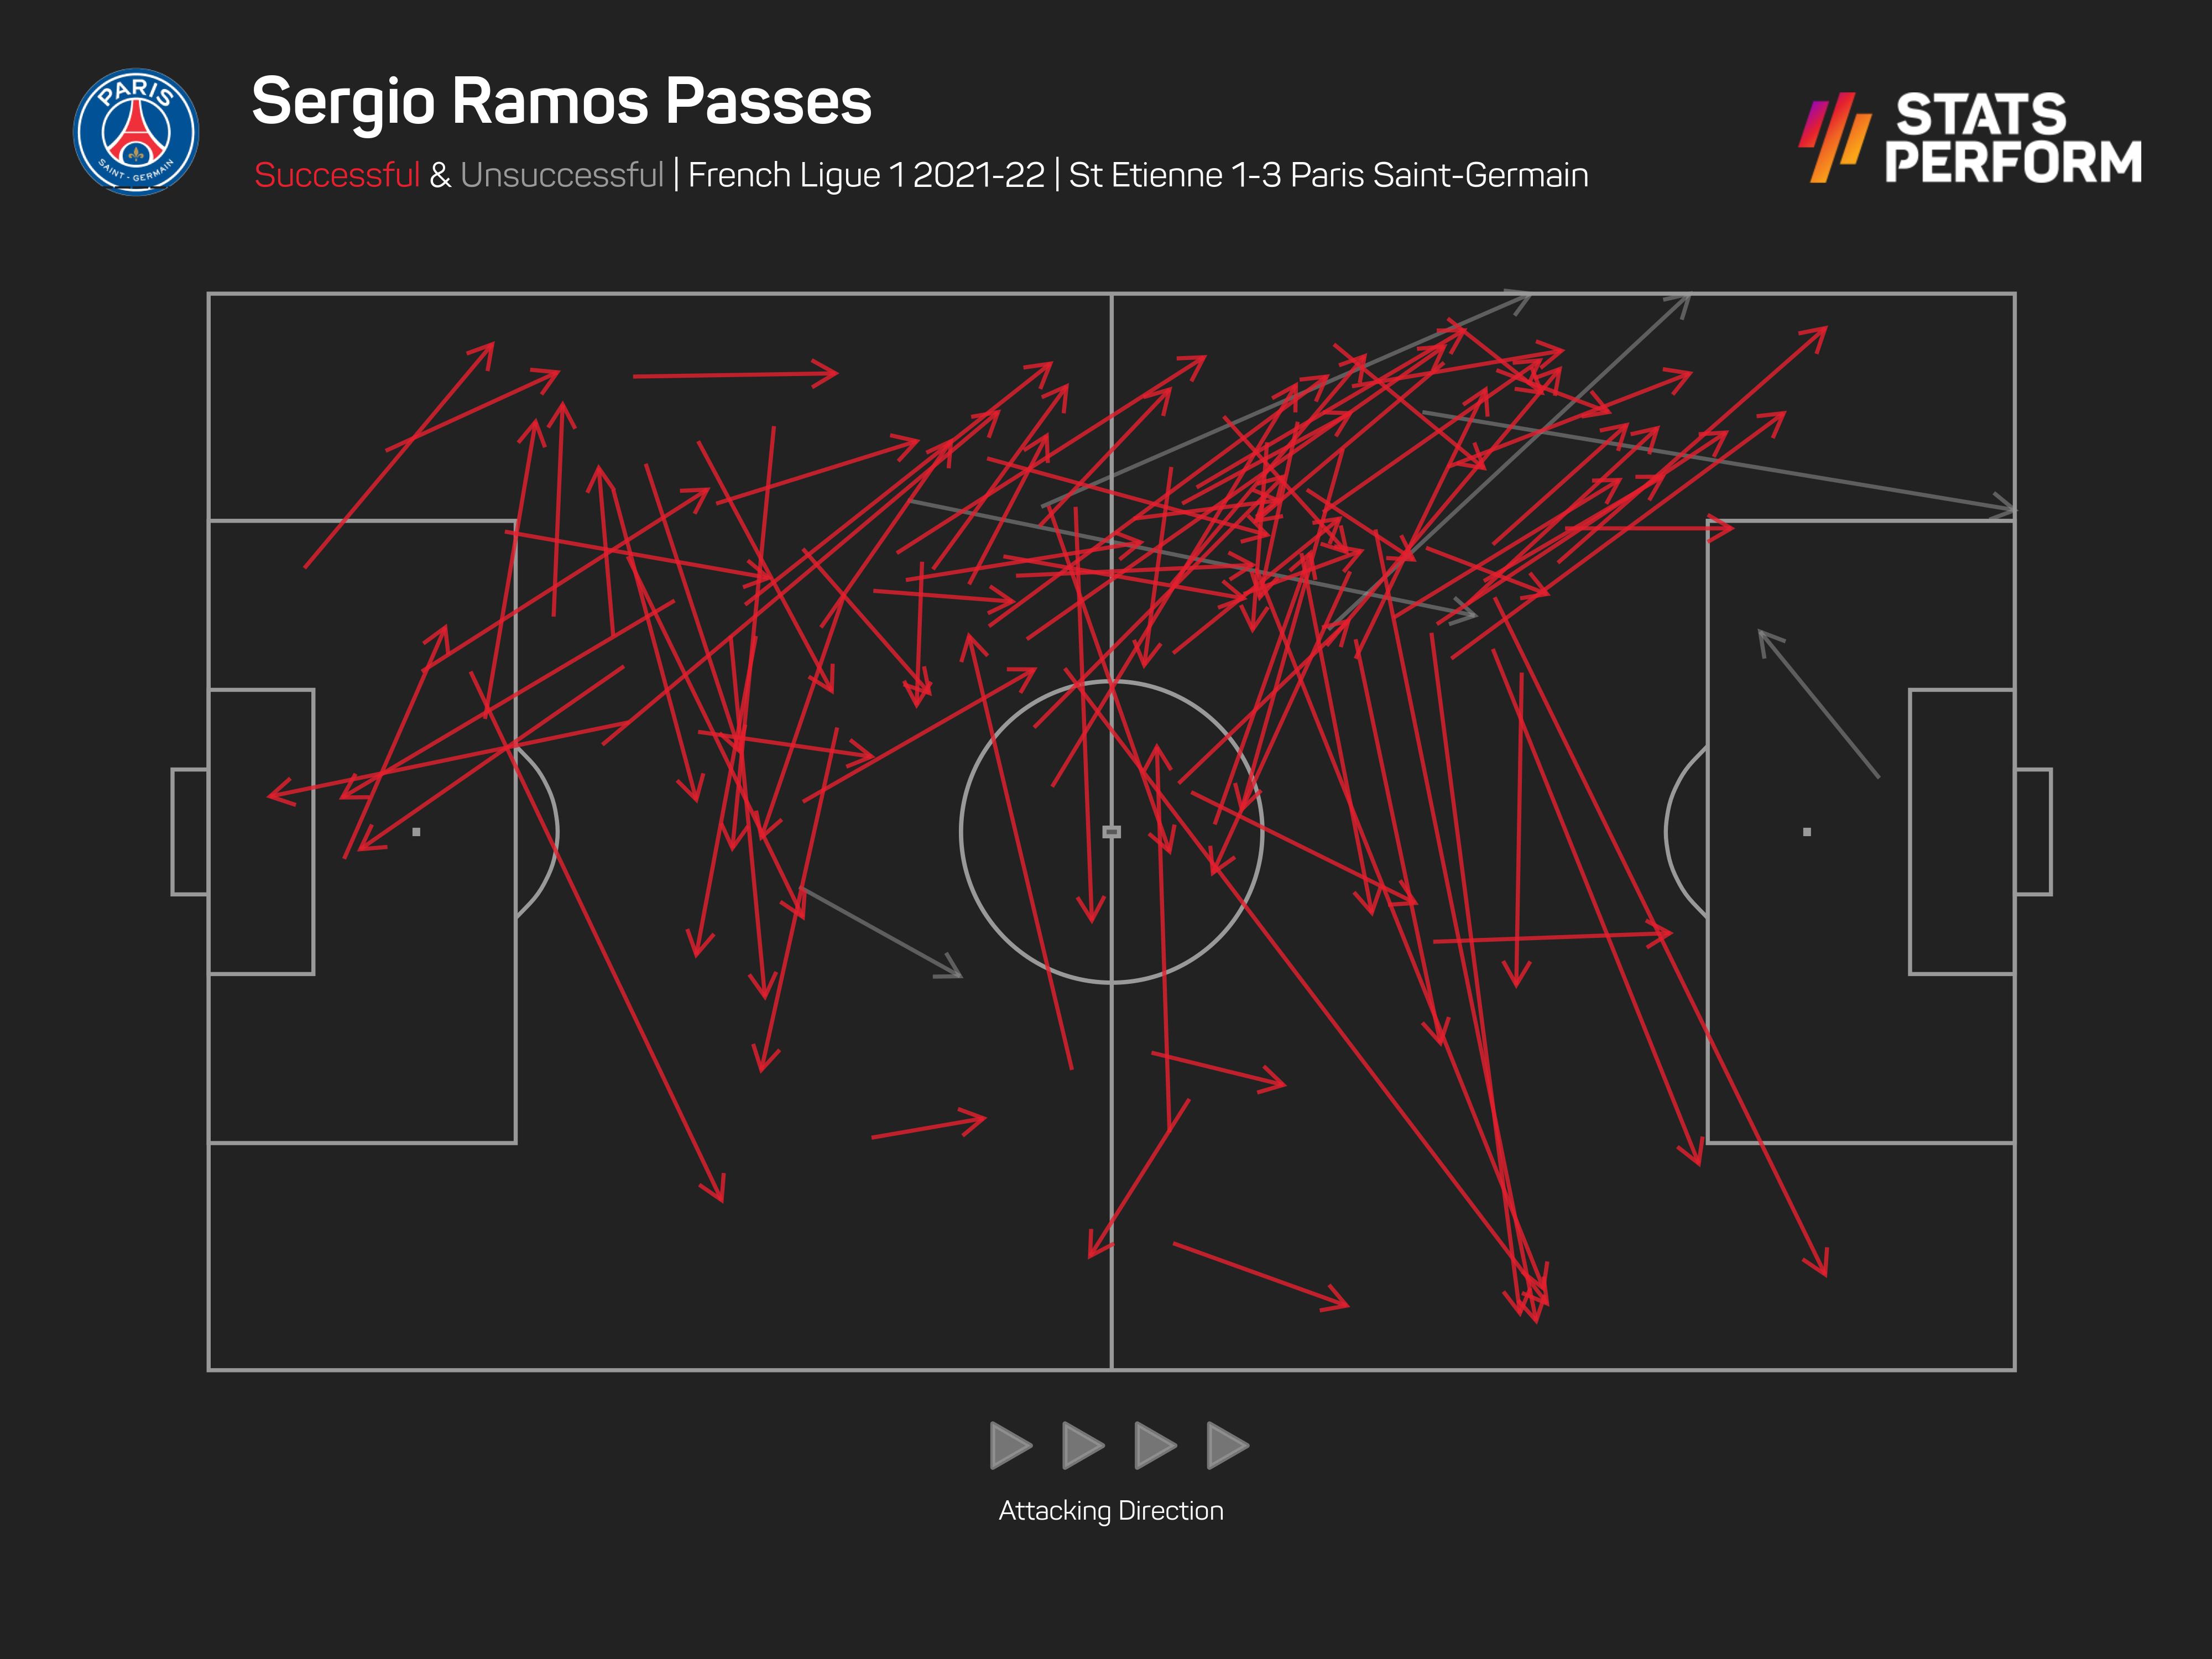 Sergio Ramos played 95 successful passes on his PSG debut